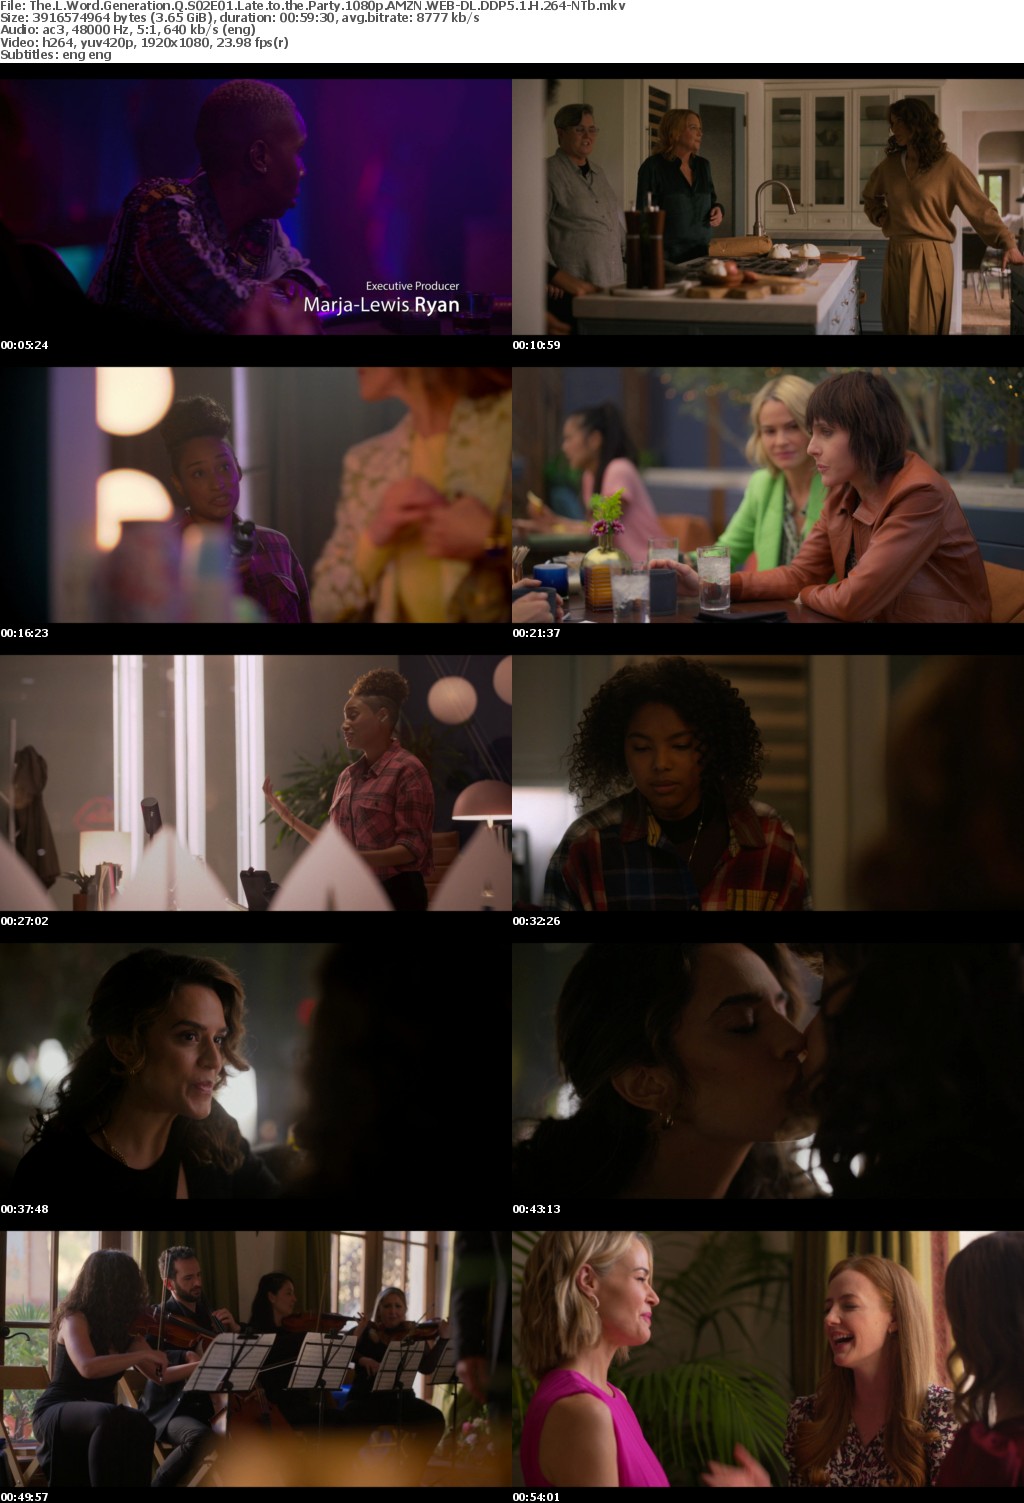 The L Word Generation Q S02E01 Late to the Party 1080p AMZN WEBRip DDP5 1 x264-NTb